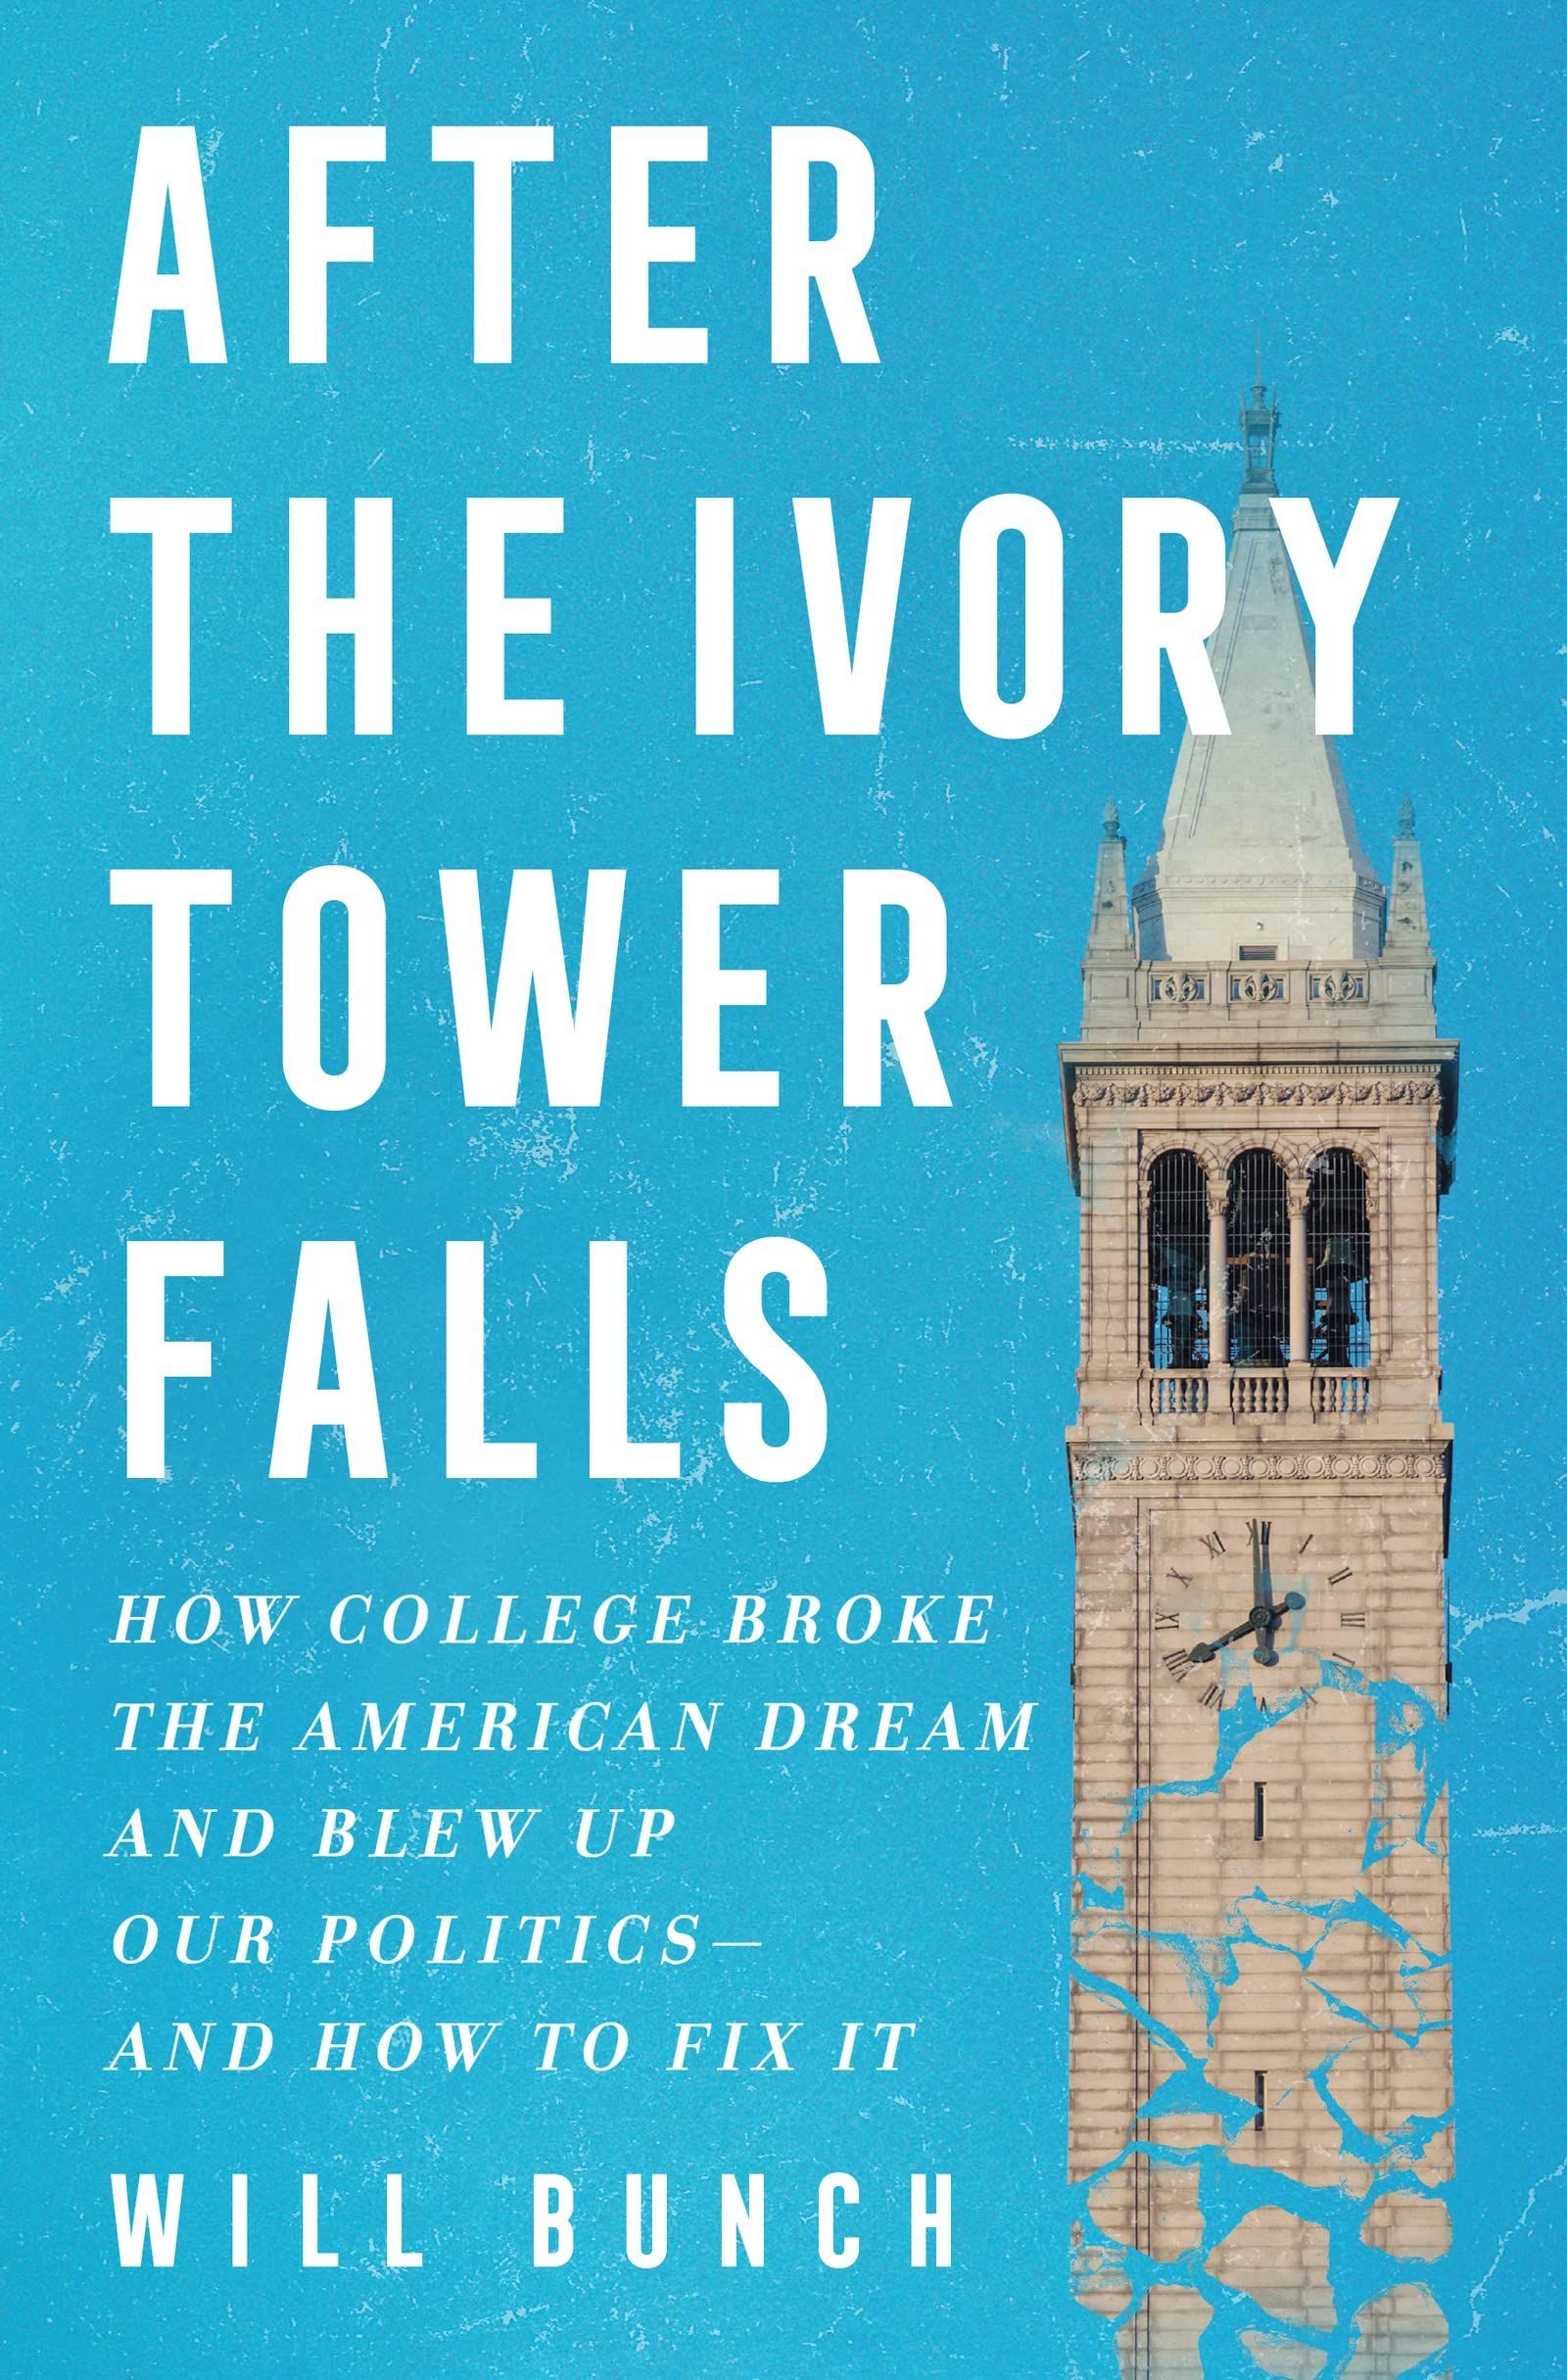 Revenge of the Poorly Educated: On Will Bunch’s “After the Ivory Tower Falls”